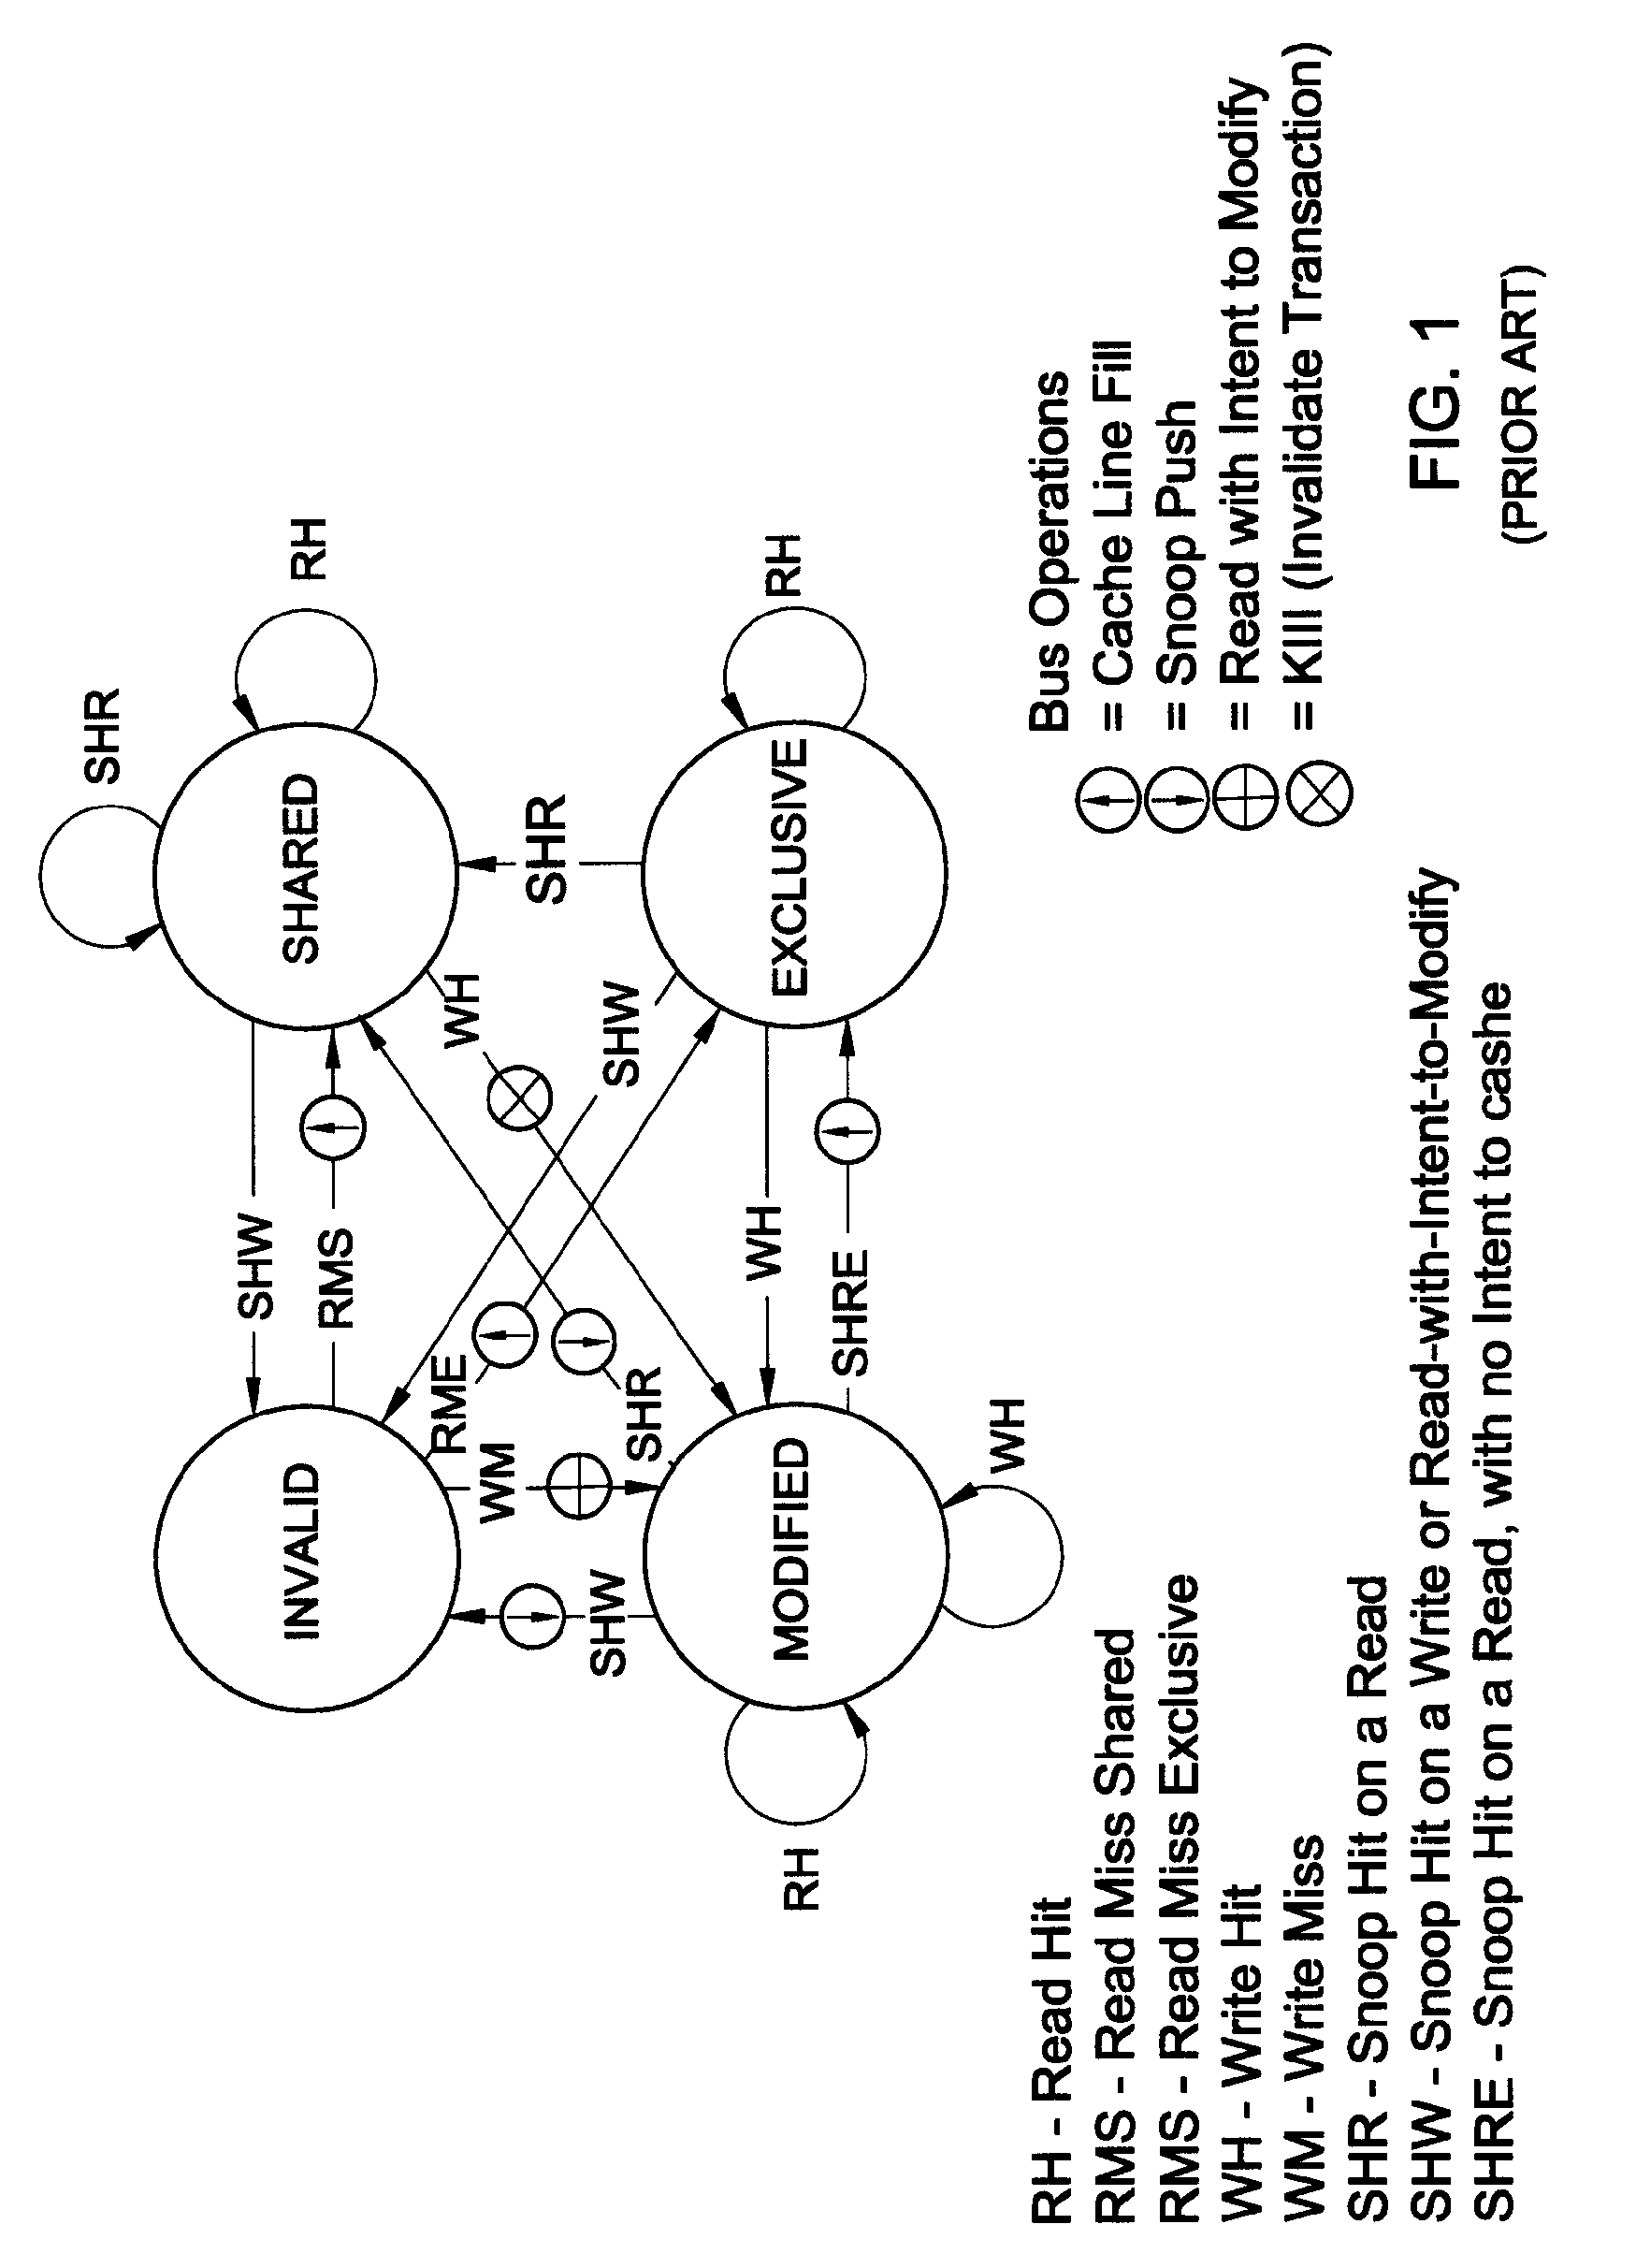 Method and apparatus for synchronizing shared data between components in a group